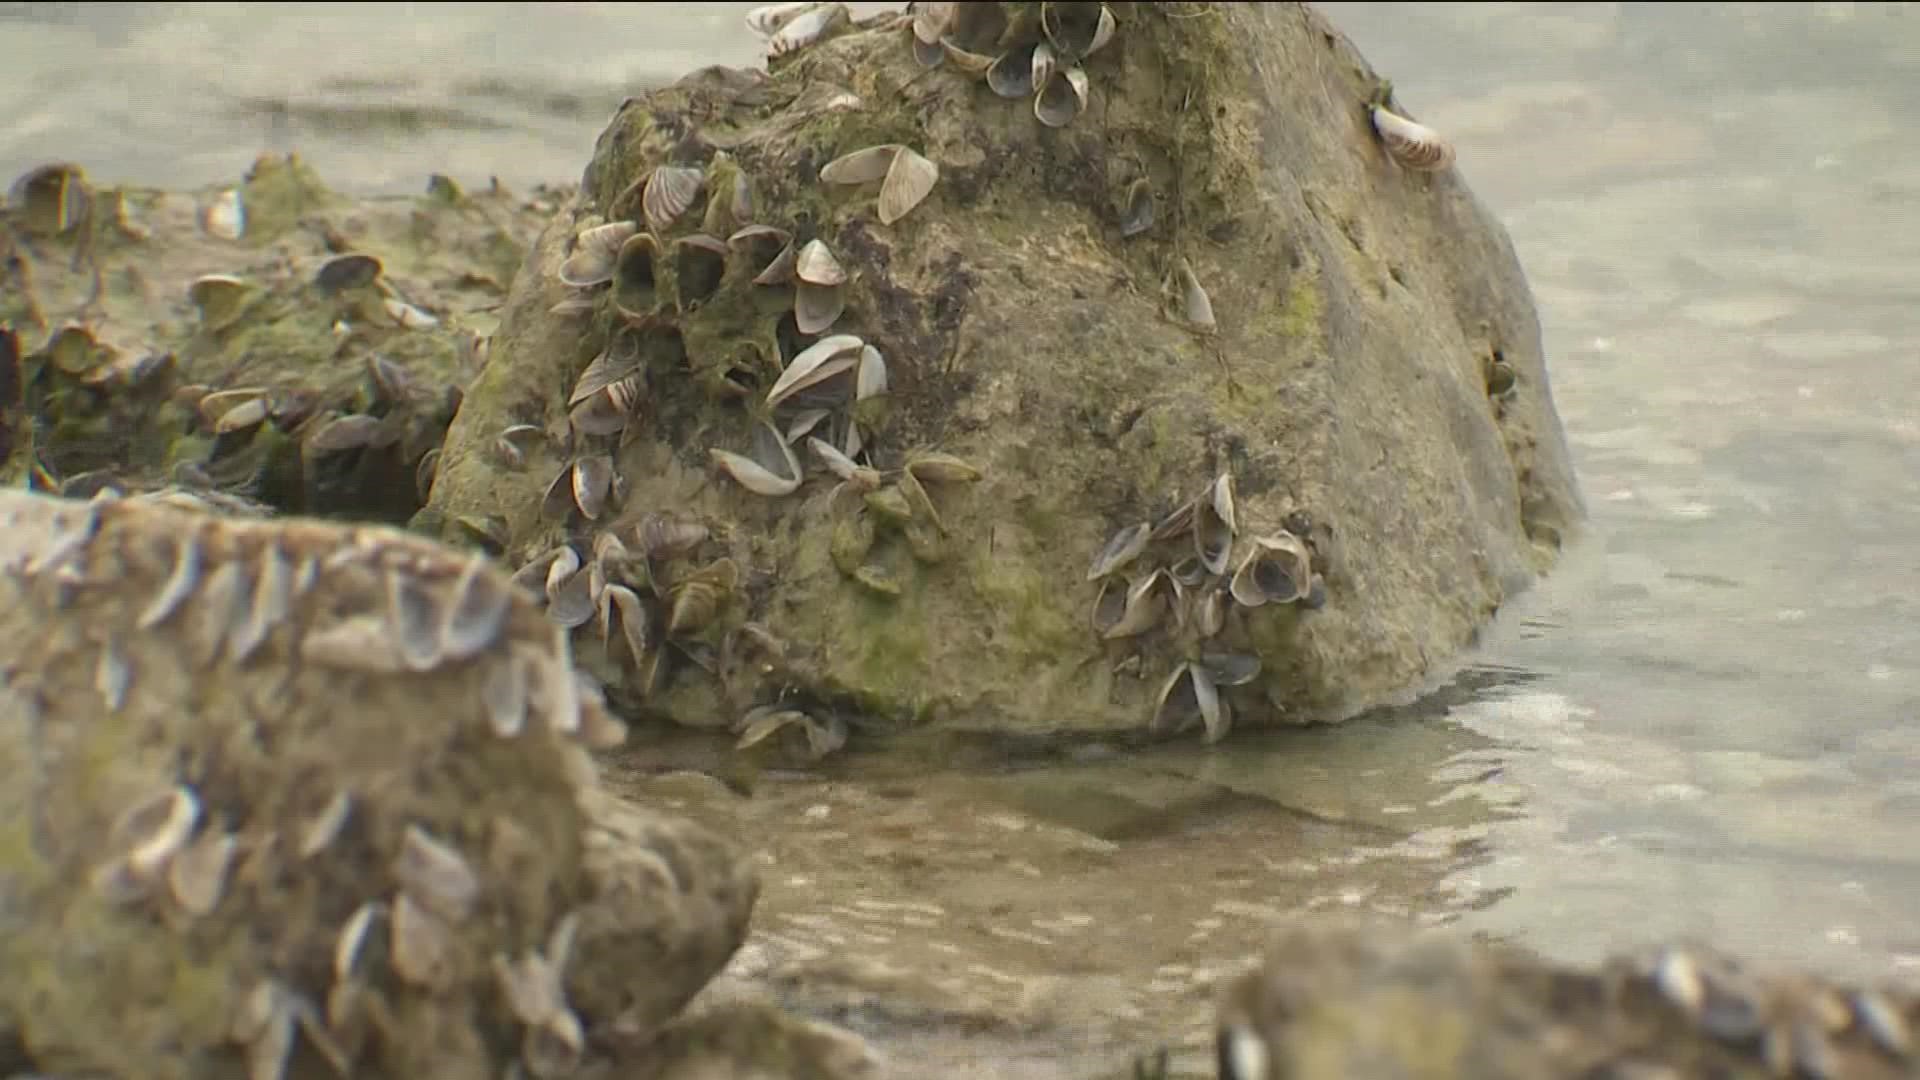 As water levels drop, some zebra mussels will die out. But the drought conditions are an opportunity for the invasive species to continue to spread.